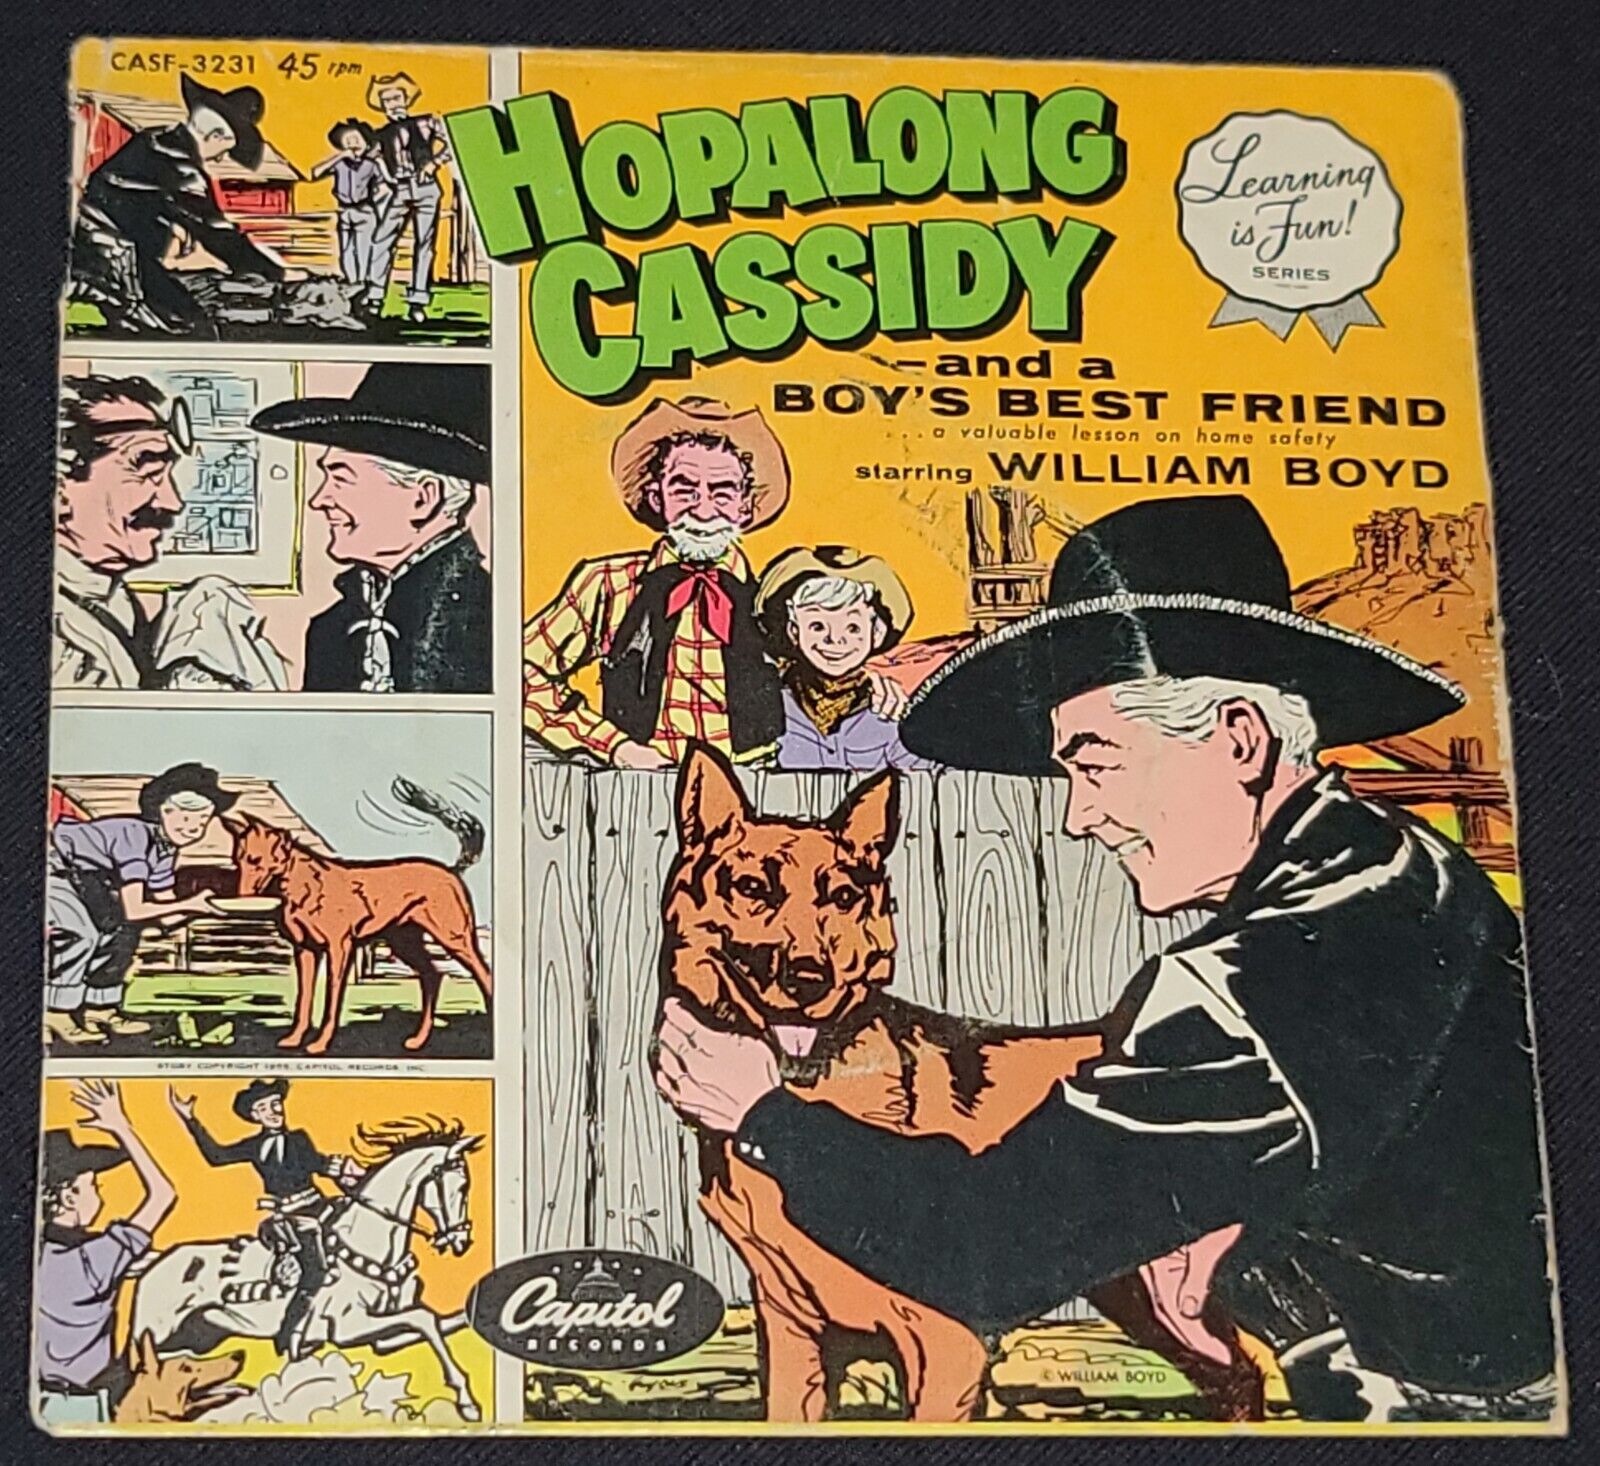 1955 - HOPALONG CASSIDY AND  A BOY'S BEST FRIEND - CAPITAL RECORD - EMPTY SLEEVE